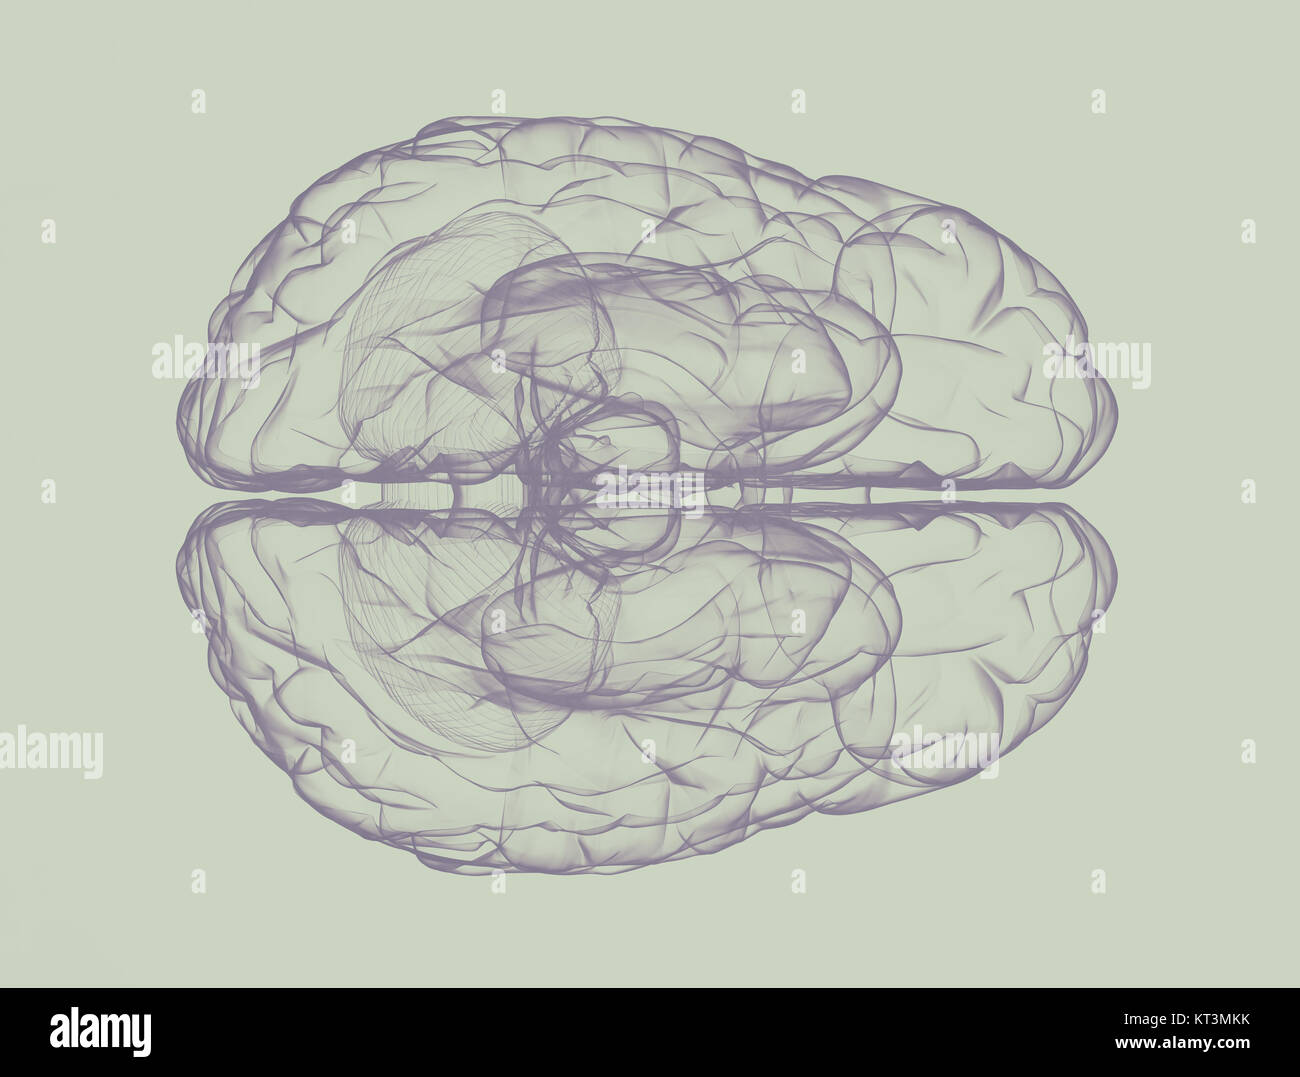 Human brain - top view 3d render isolated on white Stock Photo